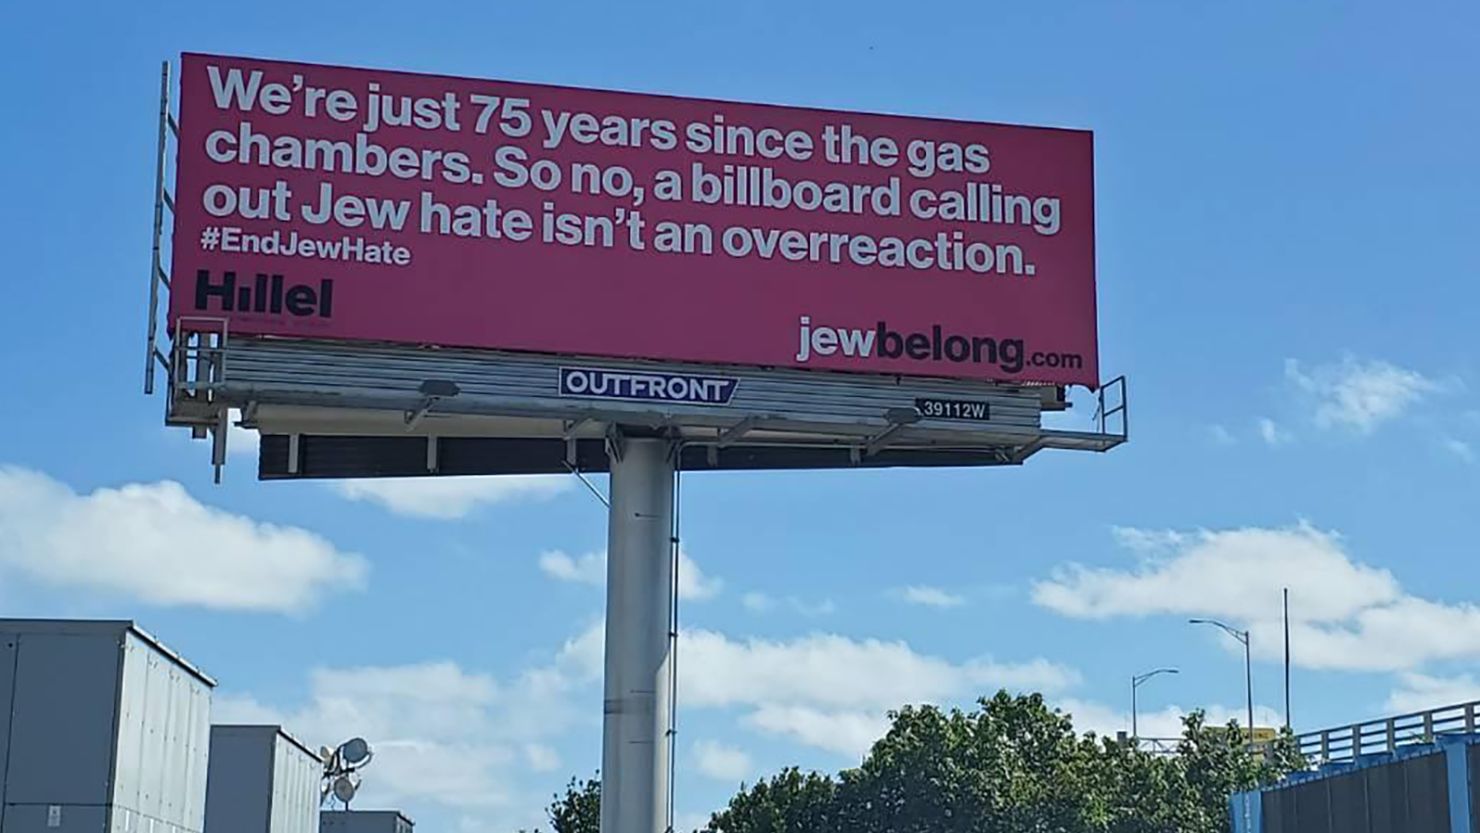 JewBelong has put up four billboards throughout South Florida in an effort to raise awareness about anti-Semitism.